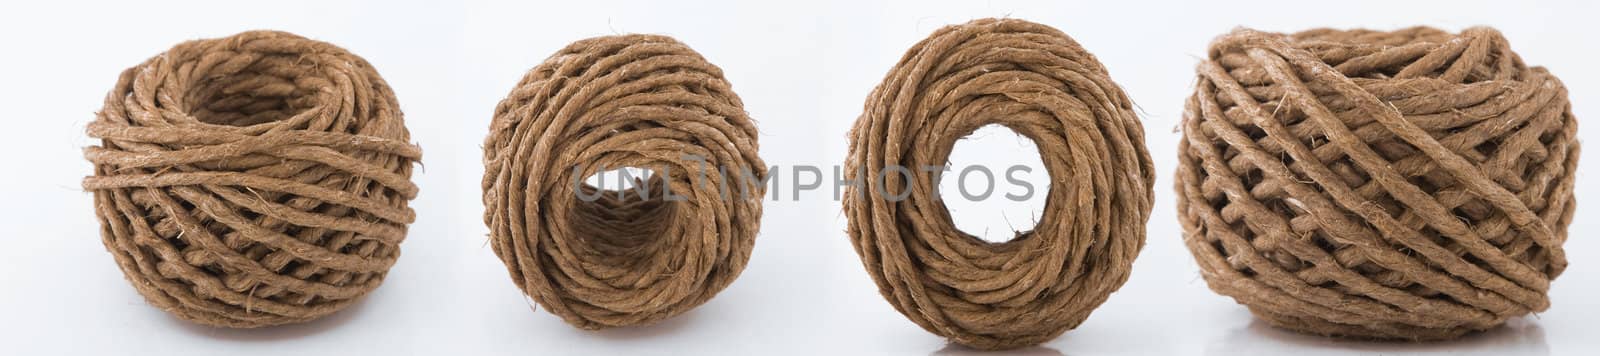 ball of twine by VictorO